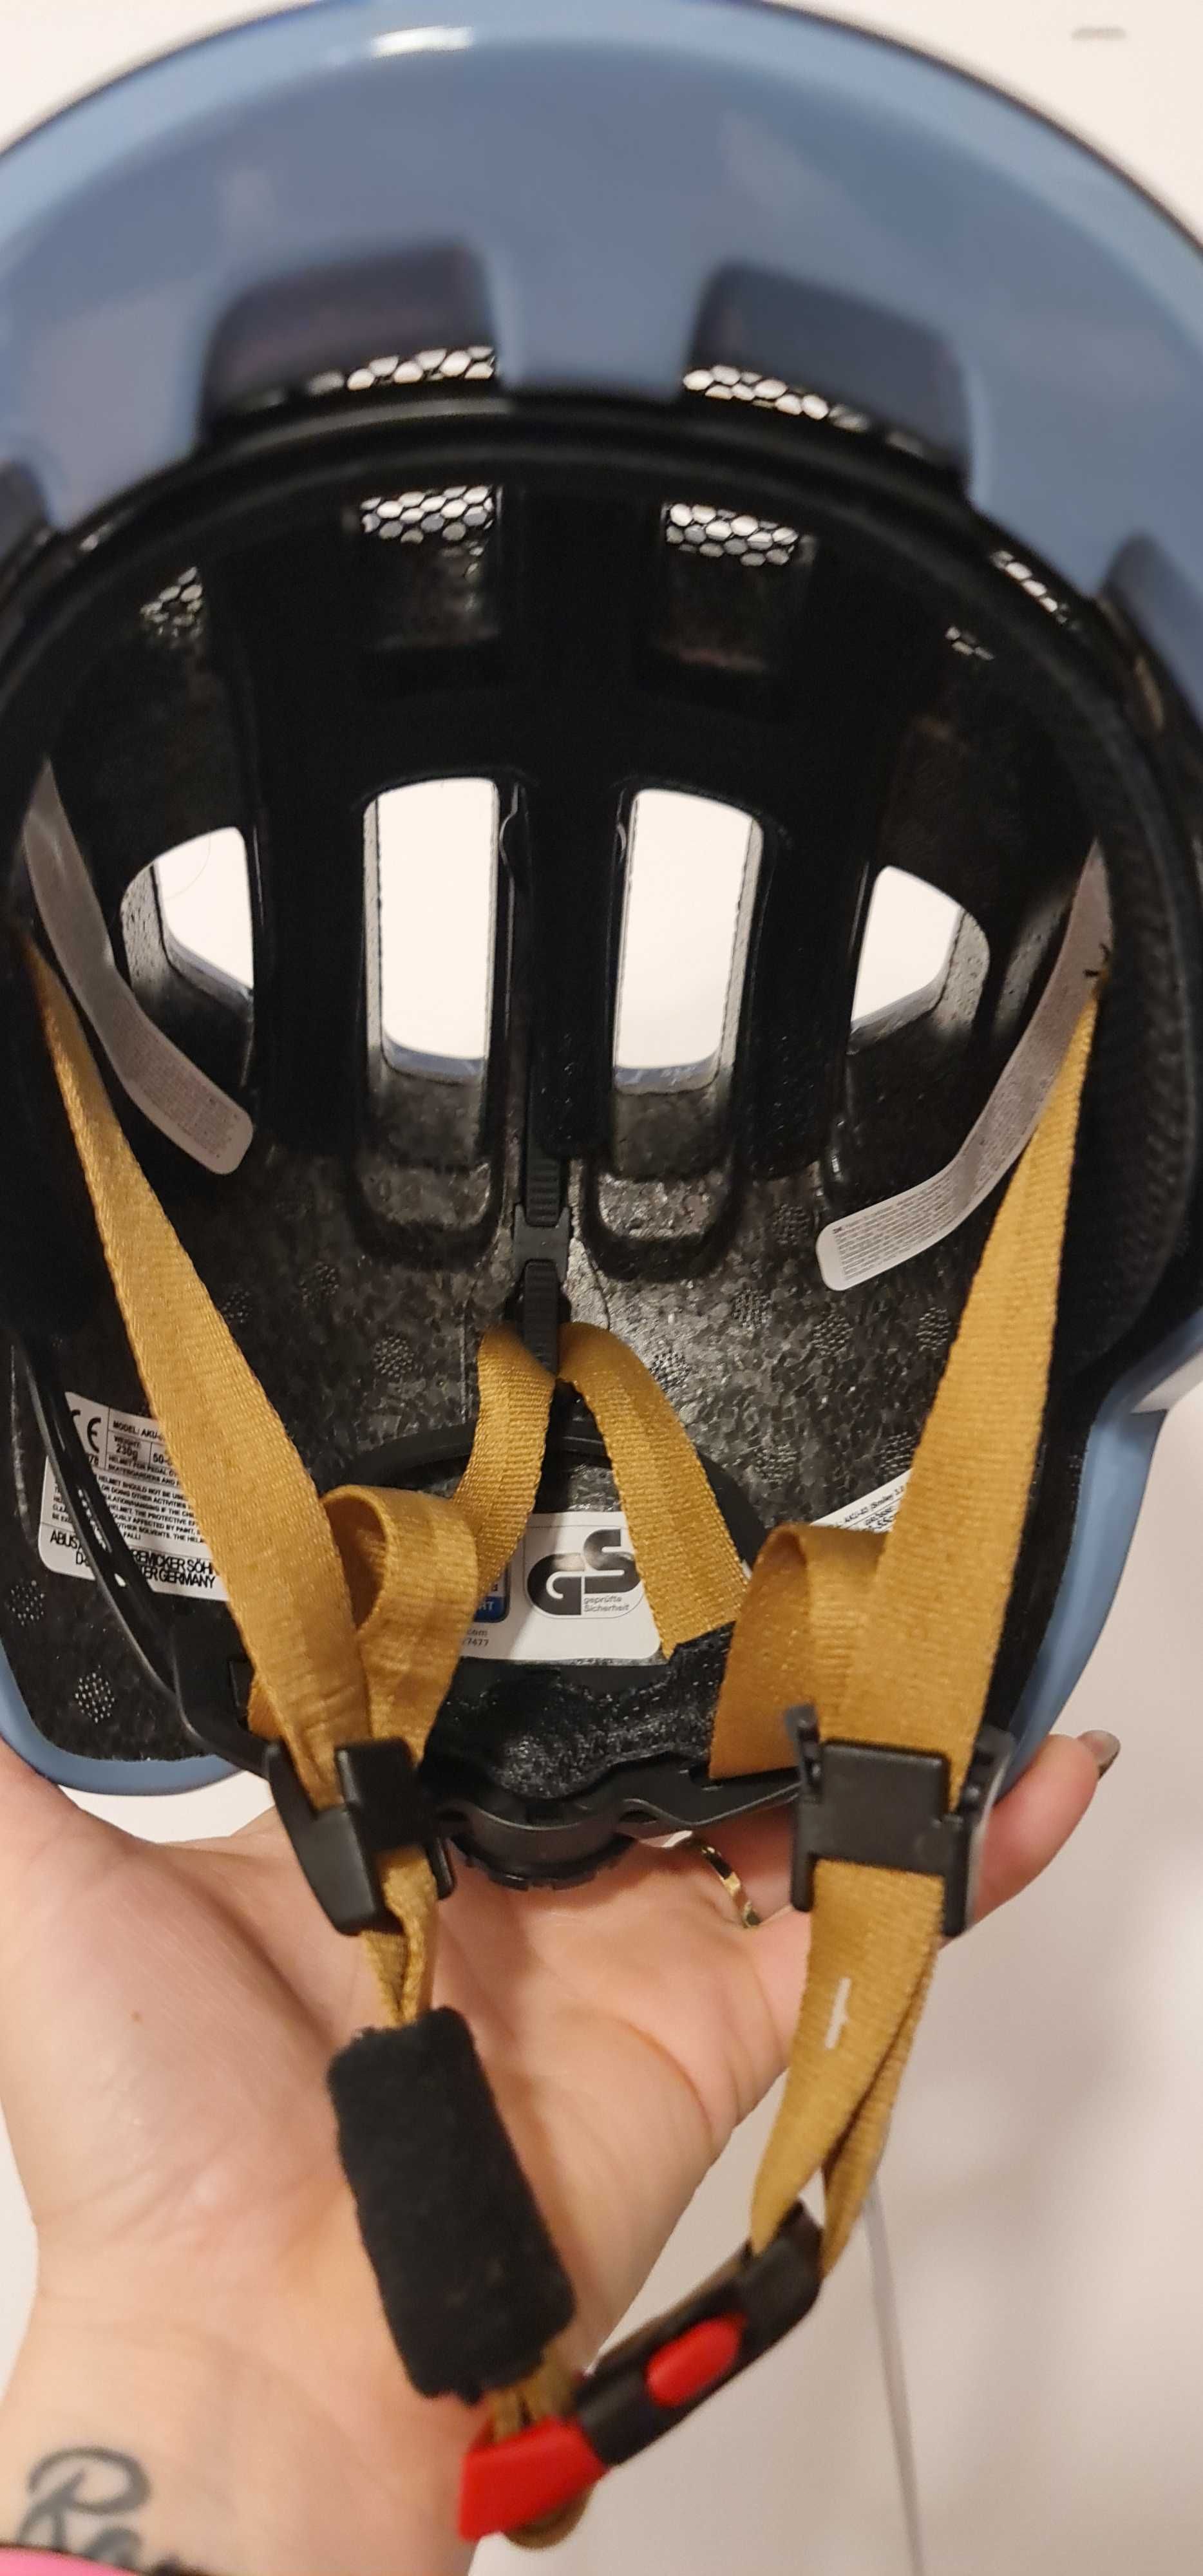 Kask rowerowy Abus Smiley 3.0 ACE r. M